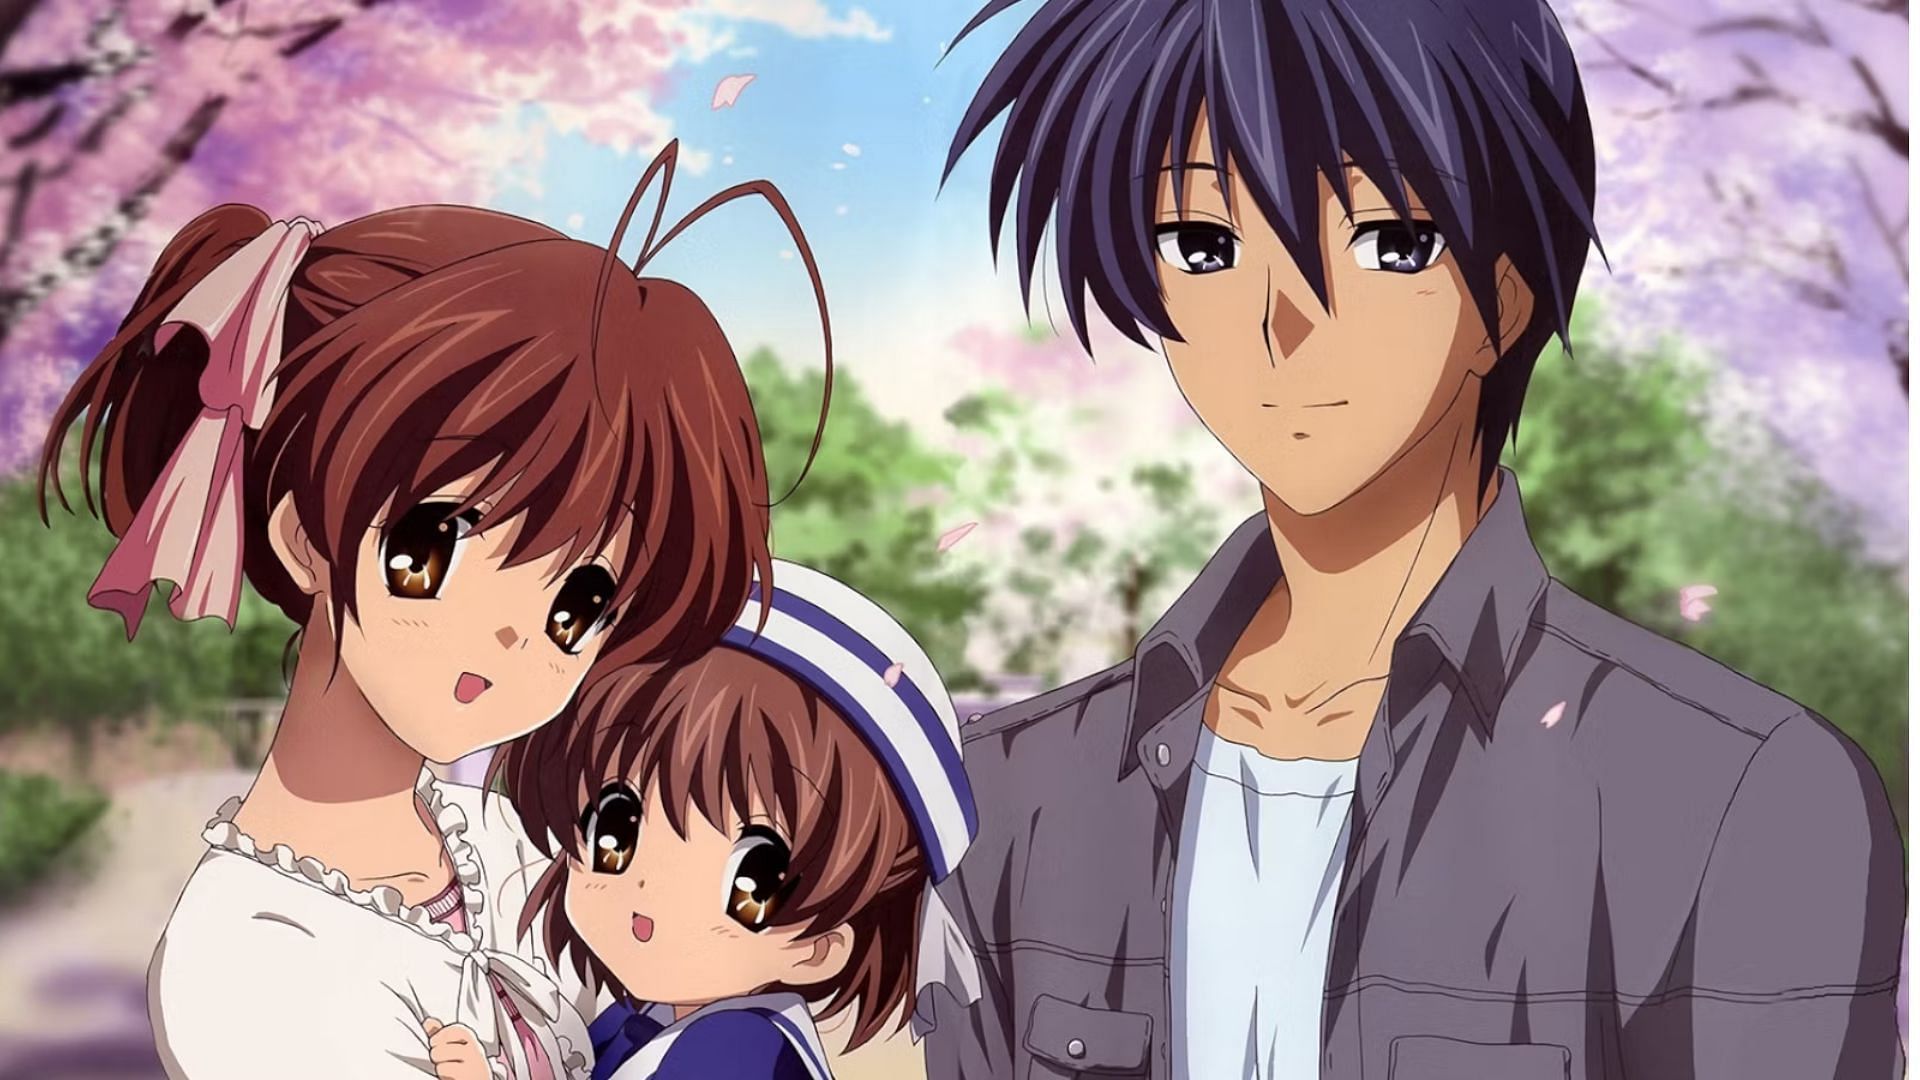 Clannad Season 1 Review: Anyone up for an emotional roller coaster